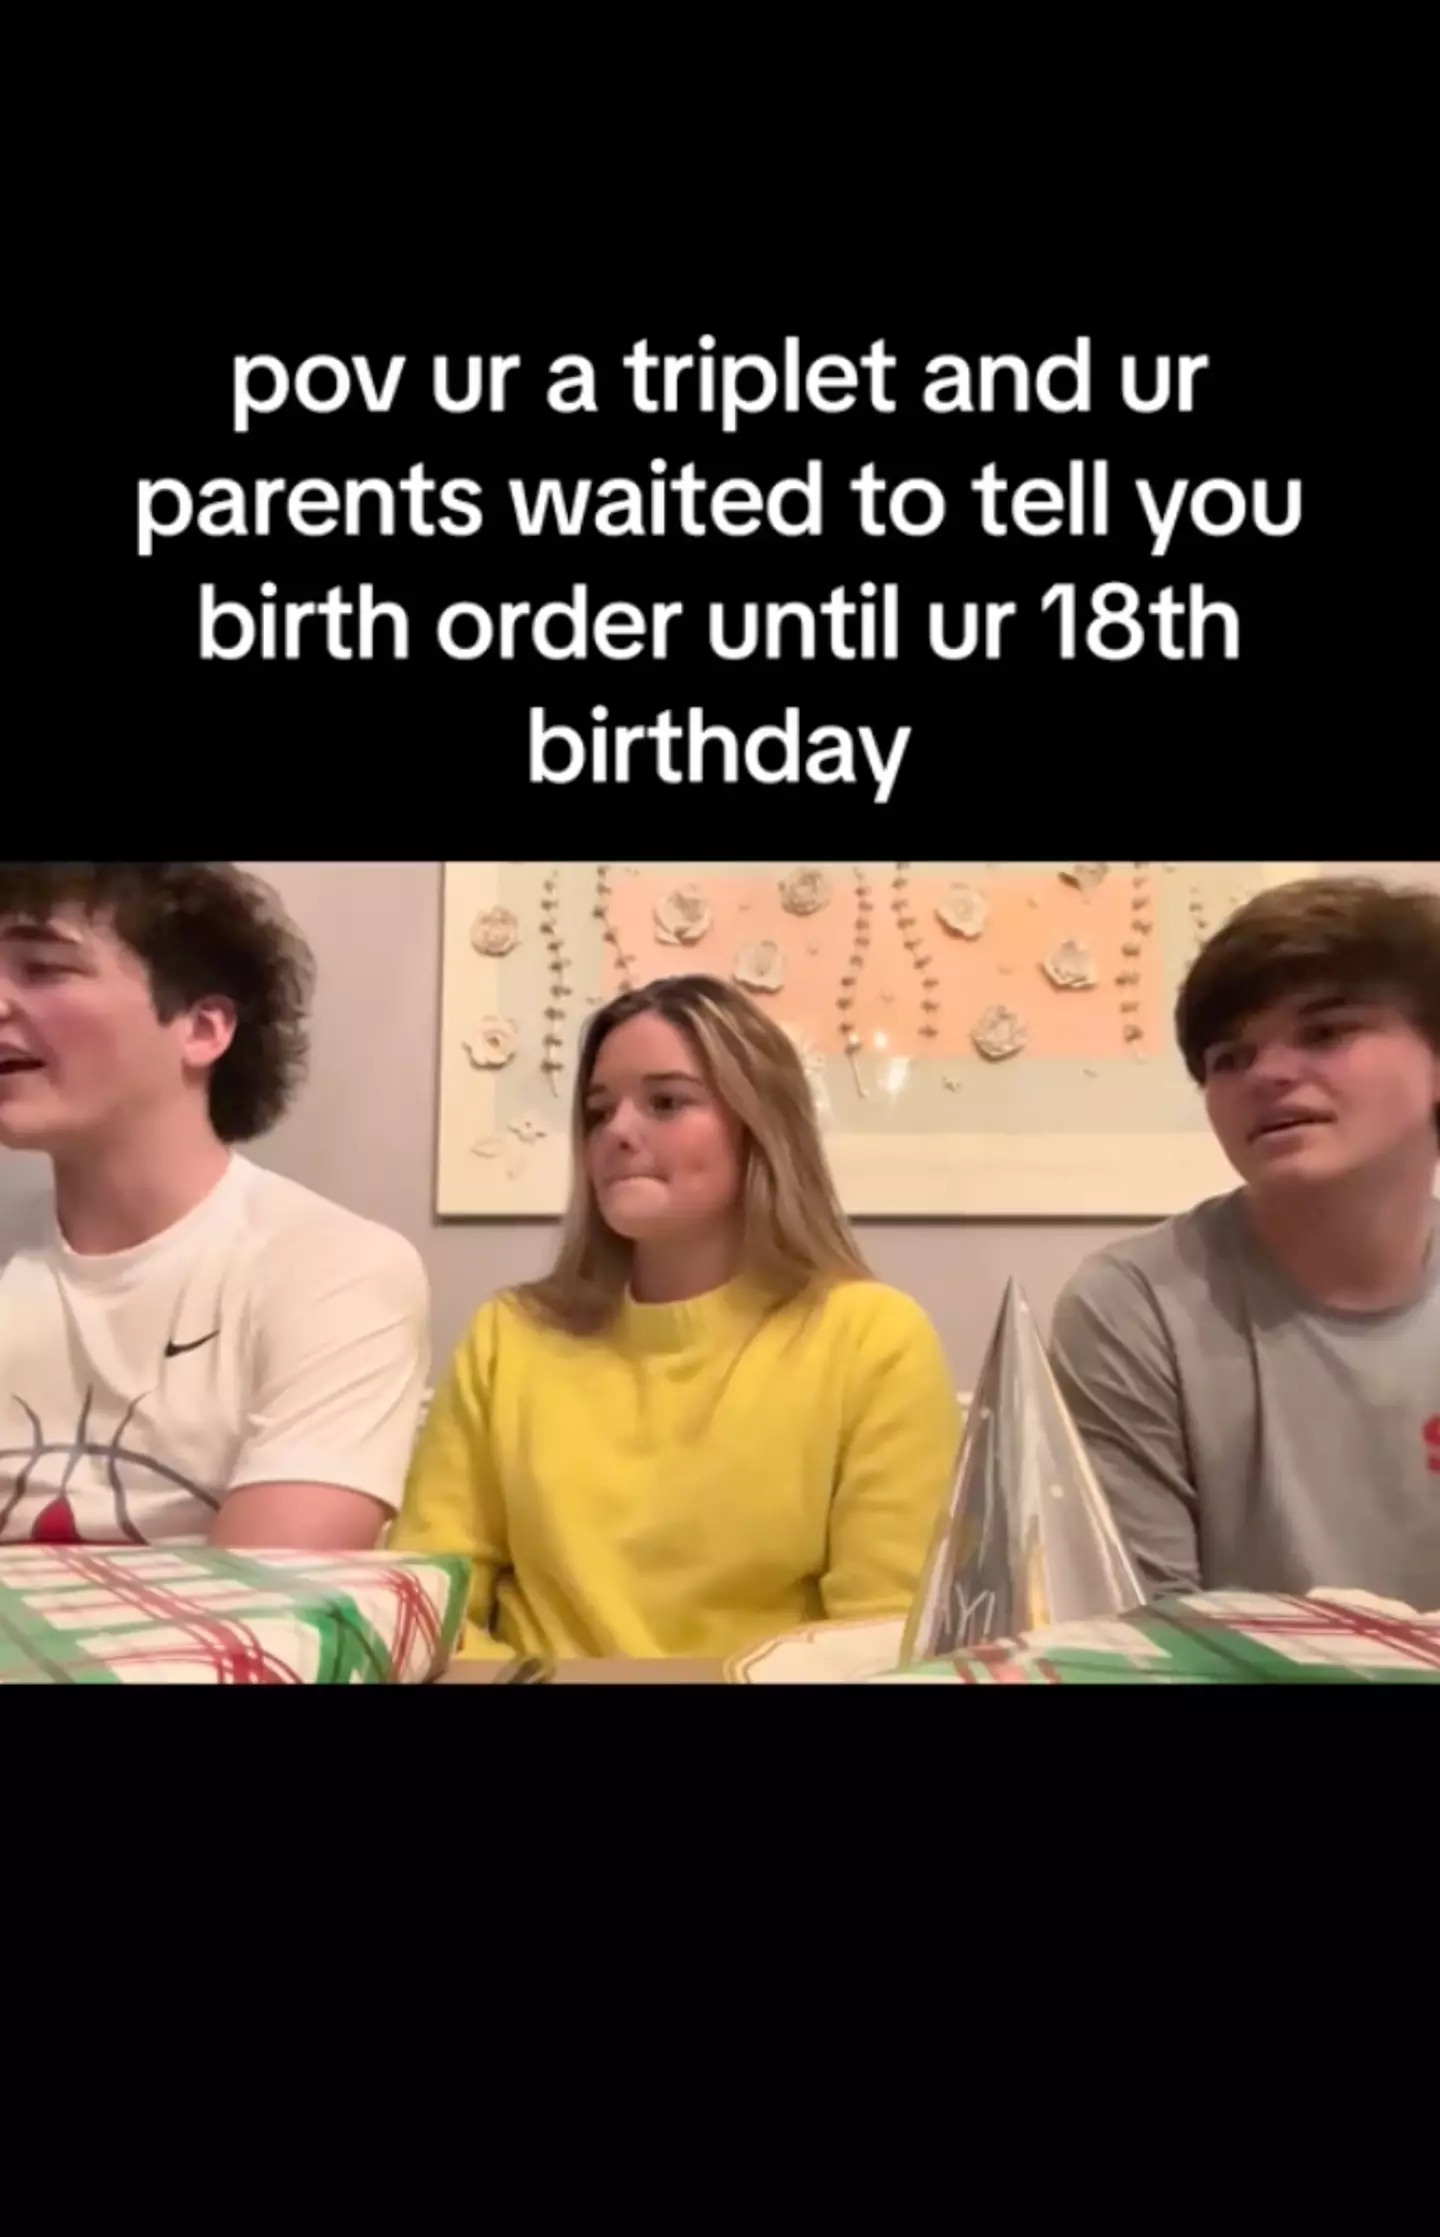 These triplets waited until they were 18 to find out their birth order. (TikTok/@janie.banie4)